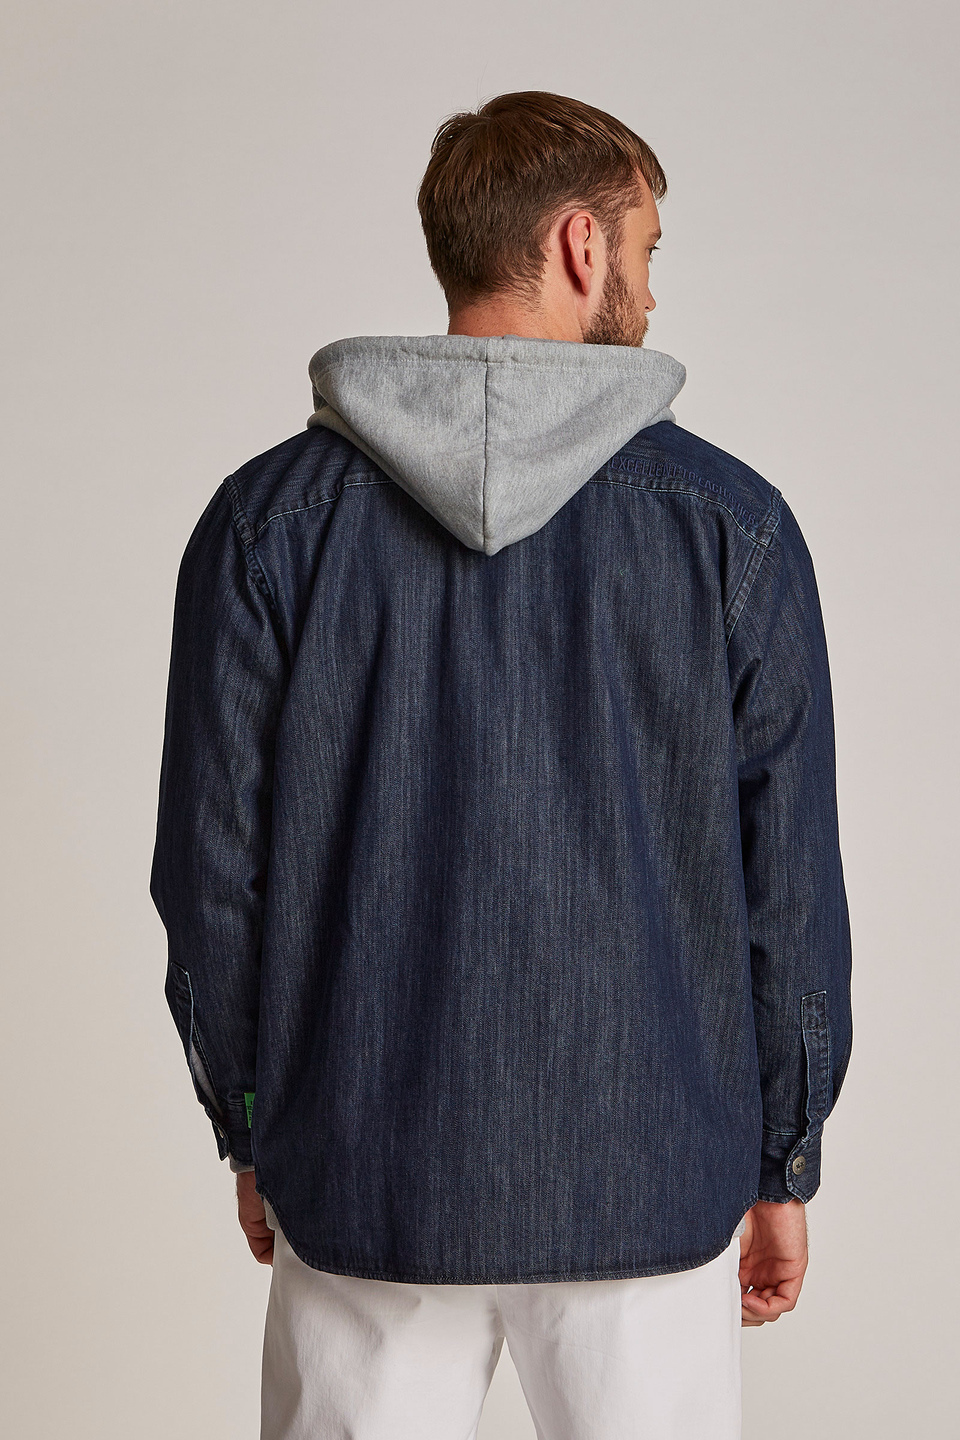 Men's oversized hooded jacket in 100% cotton fabric - La Martina - Official Online Shop